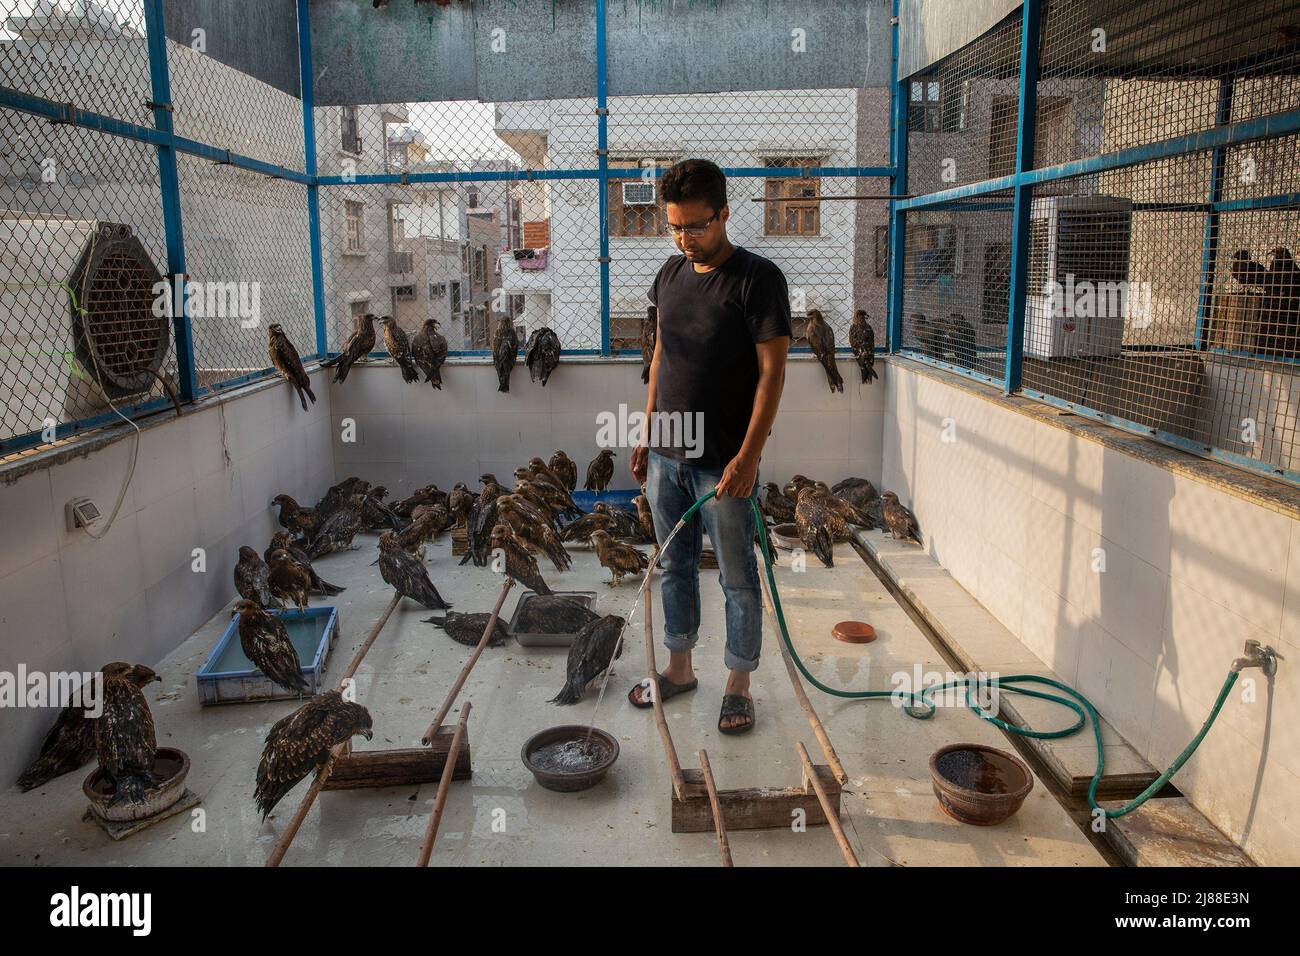 New Delhi, India. 13th May, 2022. A raptor rescuer add water for injured black kites at his clinic in New Delhi, India, May 13, 2022. Two brothers -Saud and Shehzad -in New Delhi have embarked on the mission to save injured raptors. They have been treating the injured birds at their clinic in Wazirabad, New Delhi. Last year they say they saved 2500 birds and since the beginning of this year over 1300 birds have been treated at their clinic. Credit: Javed Dar/Xinhua/Alamy Live News Stock Photo